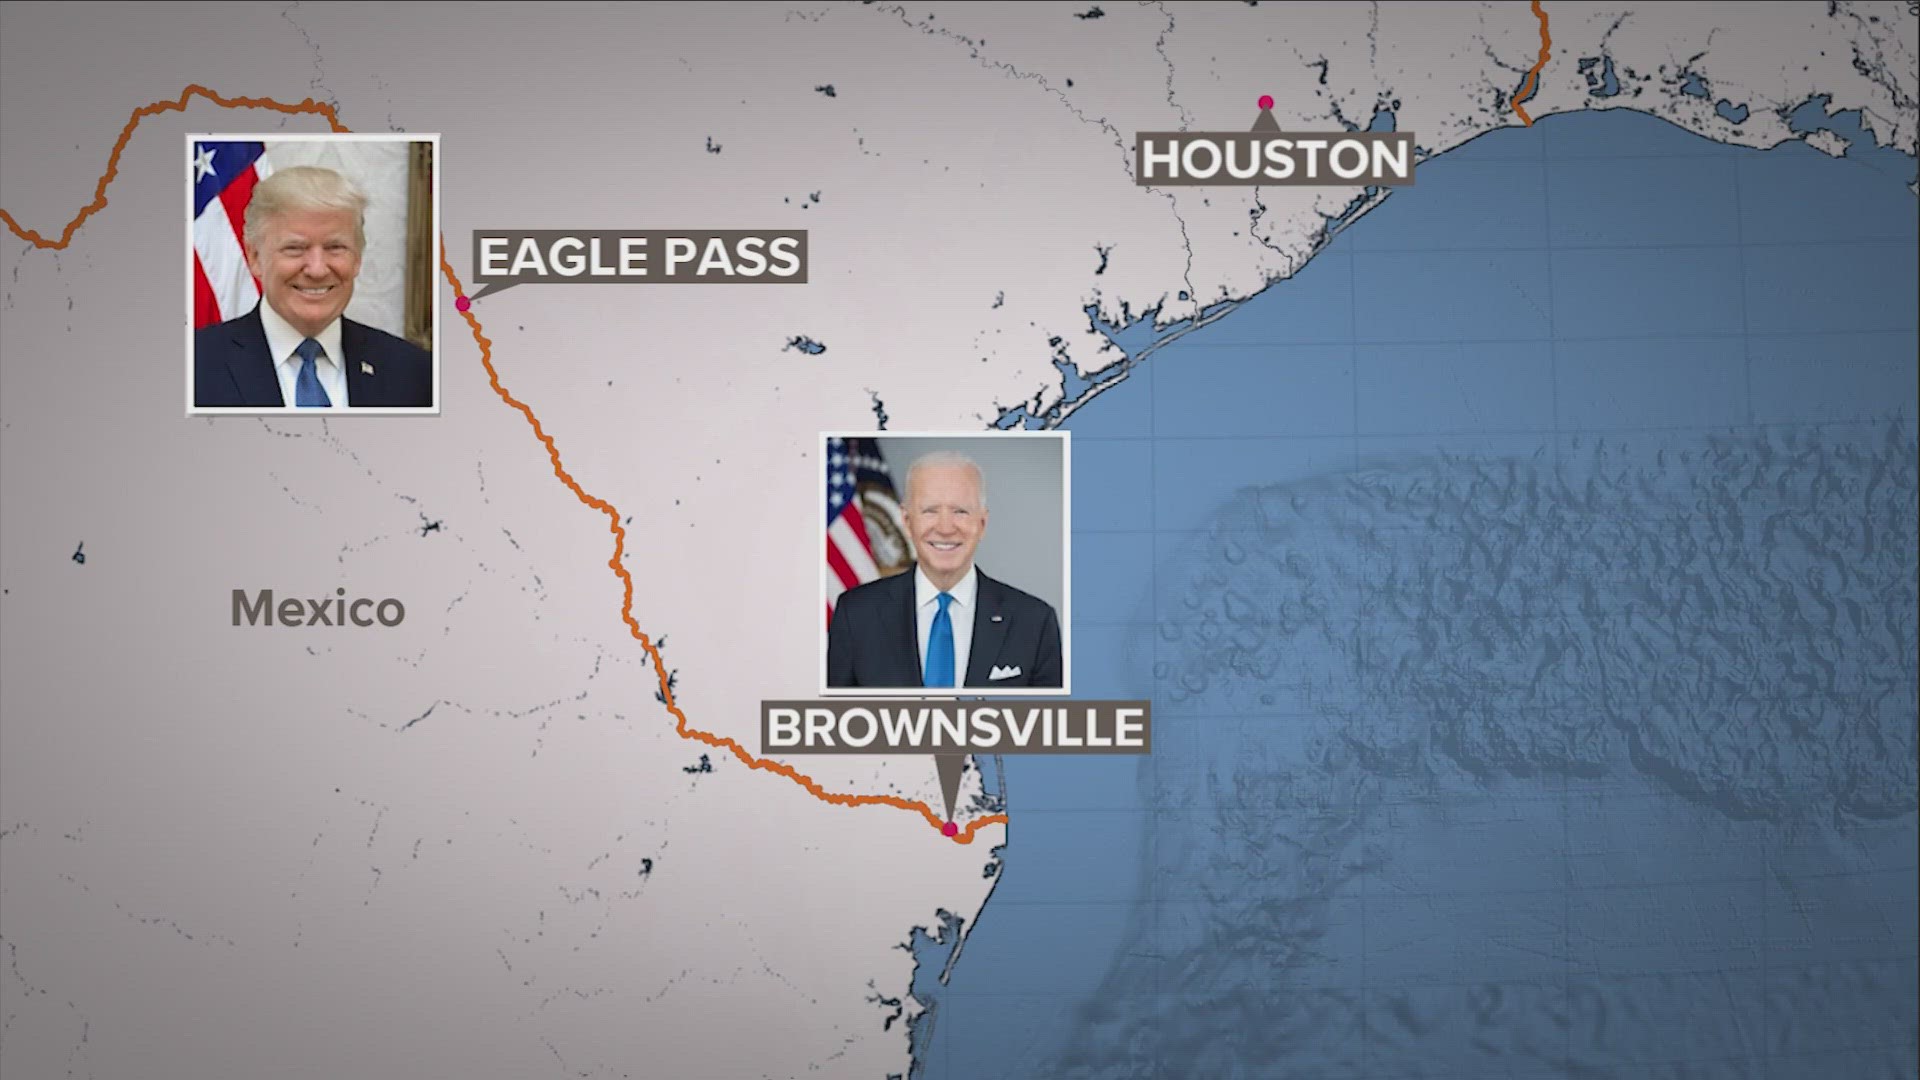 Three hundred miles apart, President Joe Biden and likely Republican challenger Donald Trump walked along the U.S.-Mexico border in Texas in dueling trips.